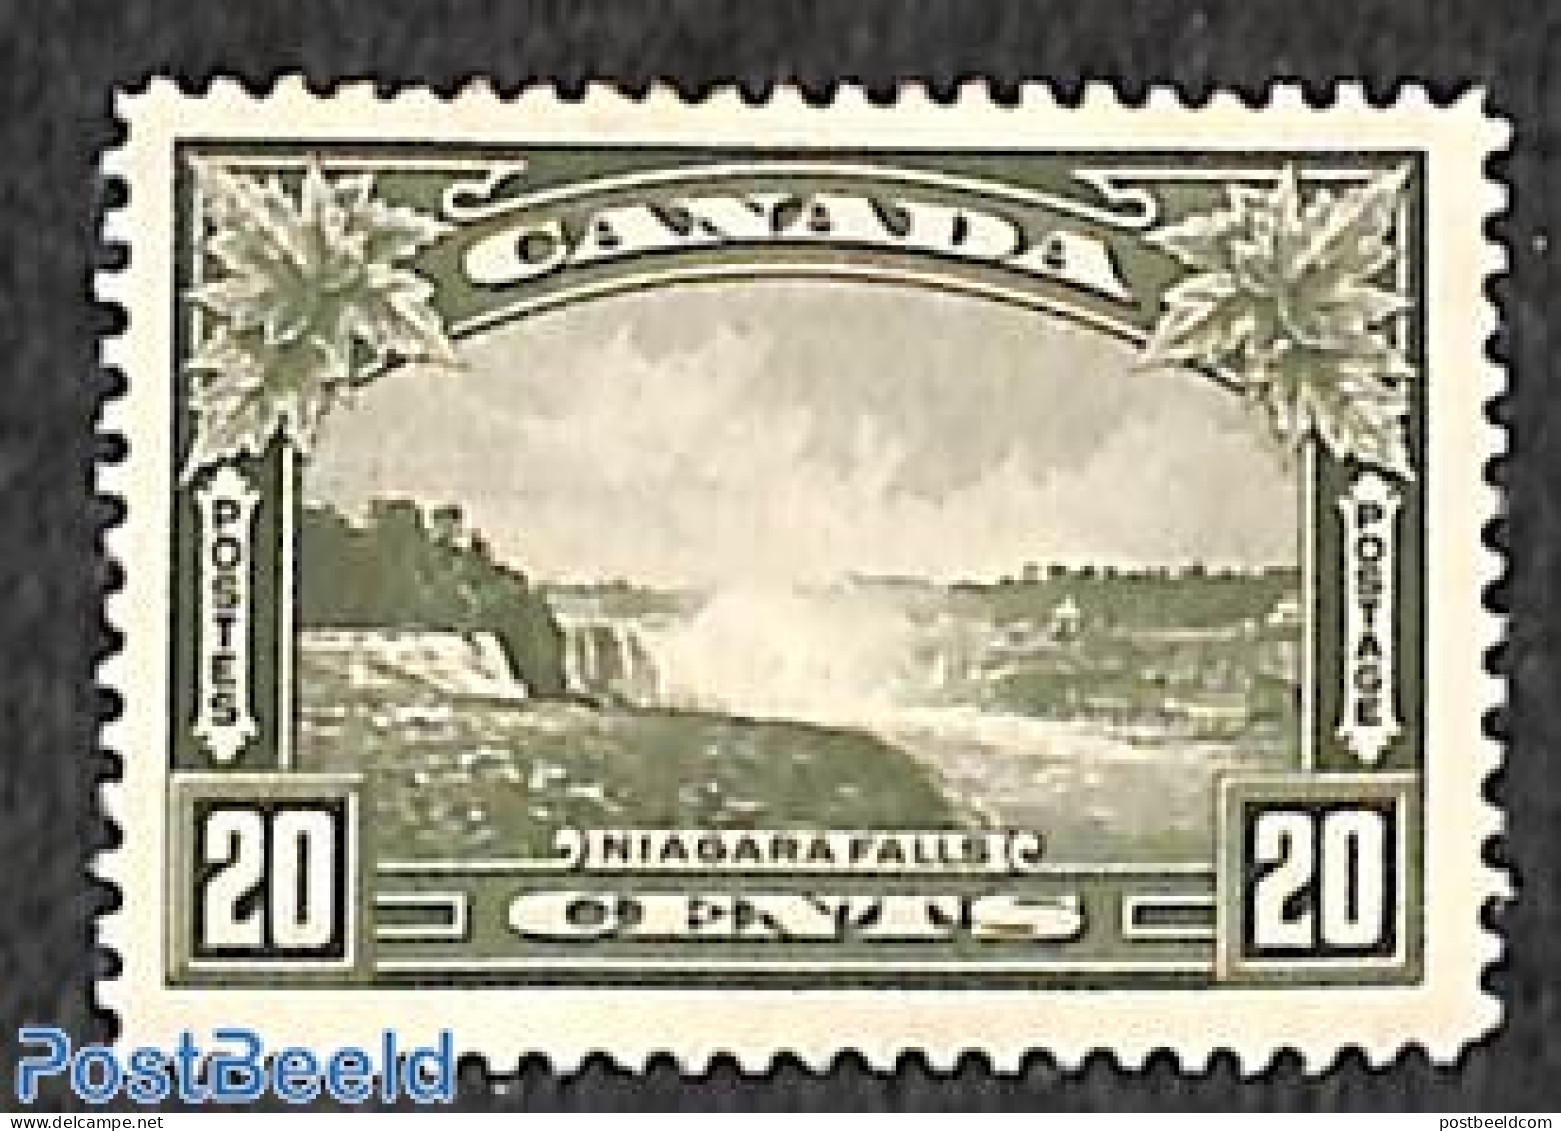 Canada 1935 20c, Stamp Out Of Set, Unused (hinged), Nature - Water, Dams & Falls - Nuovi